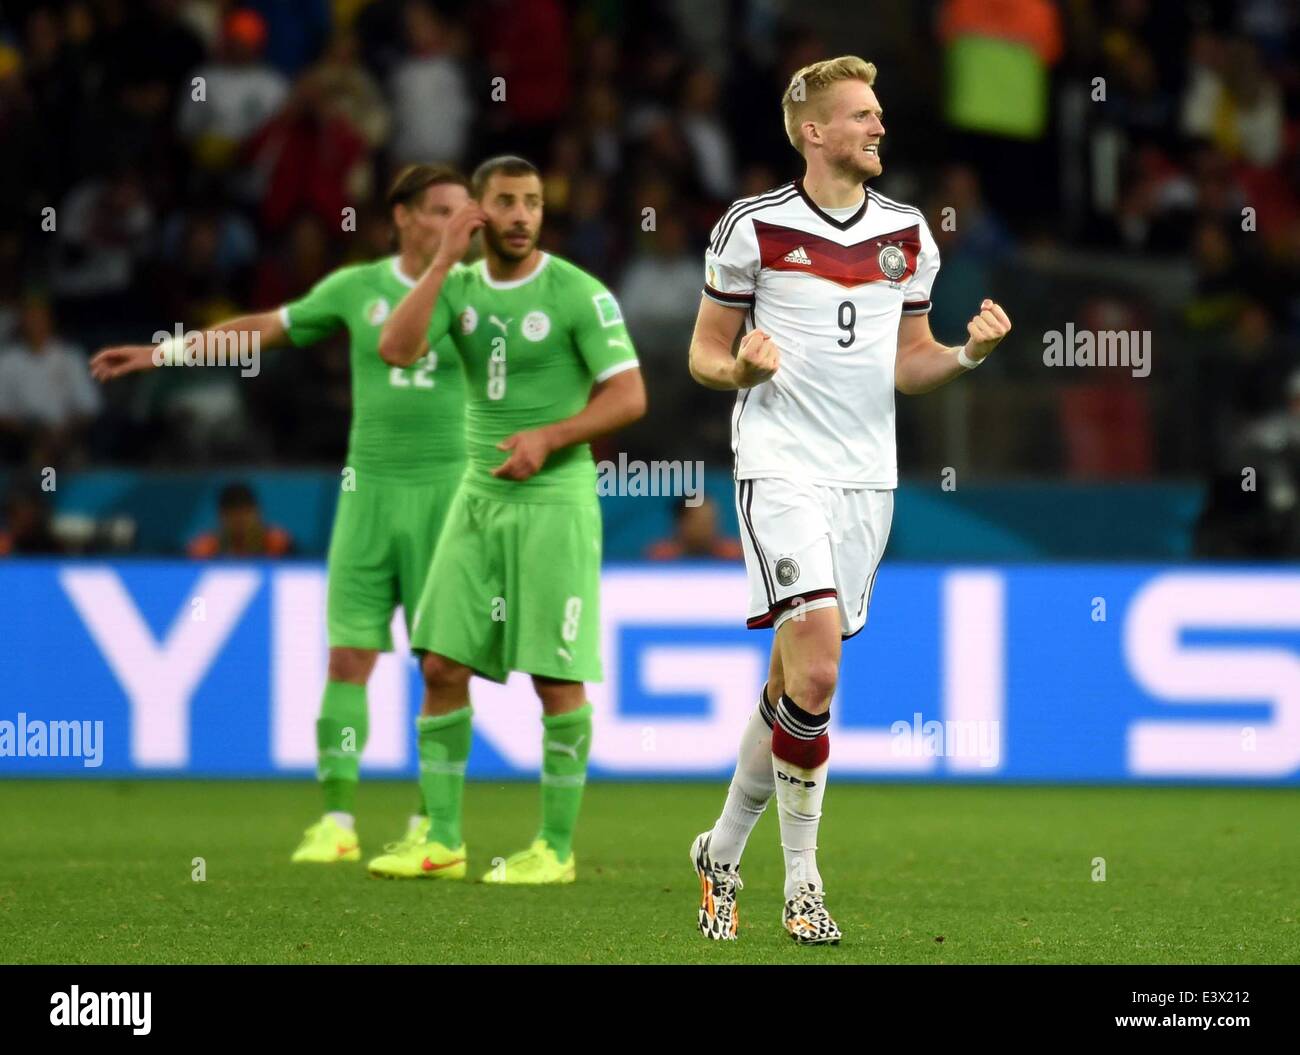 Porto Alegre, Brazil. 30th June, 2014. Germany's Andre Schurrle (R) celebrates a goal during the extra time of a Round of 16 match between Germany and Algeria of 2014 FIFA World Cup at the Estadio Beira-Rio Stadium in Porto Alegre, Brazil, on June 30, 2014. Credit:  Li Ga/Xinhua/Alamy Live News Stock Photo